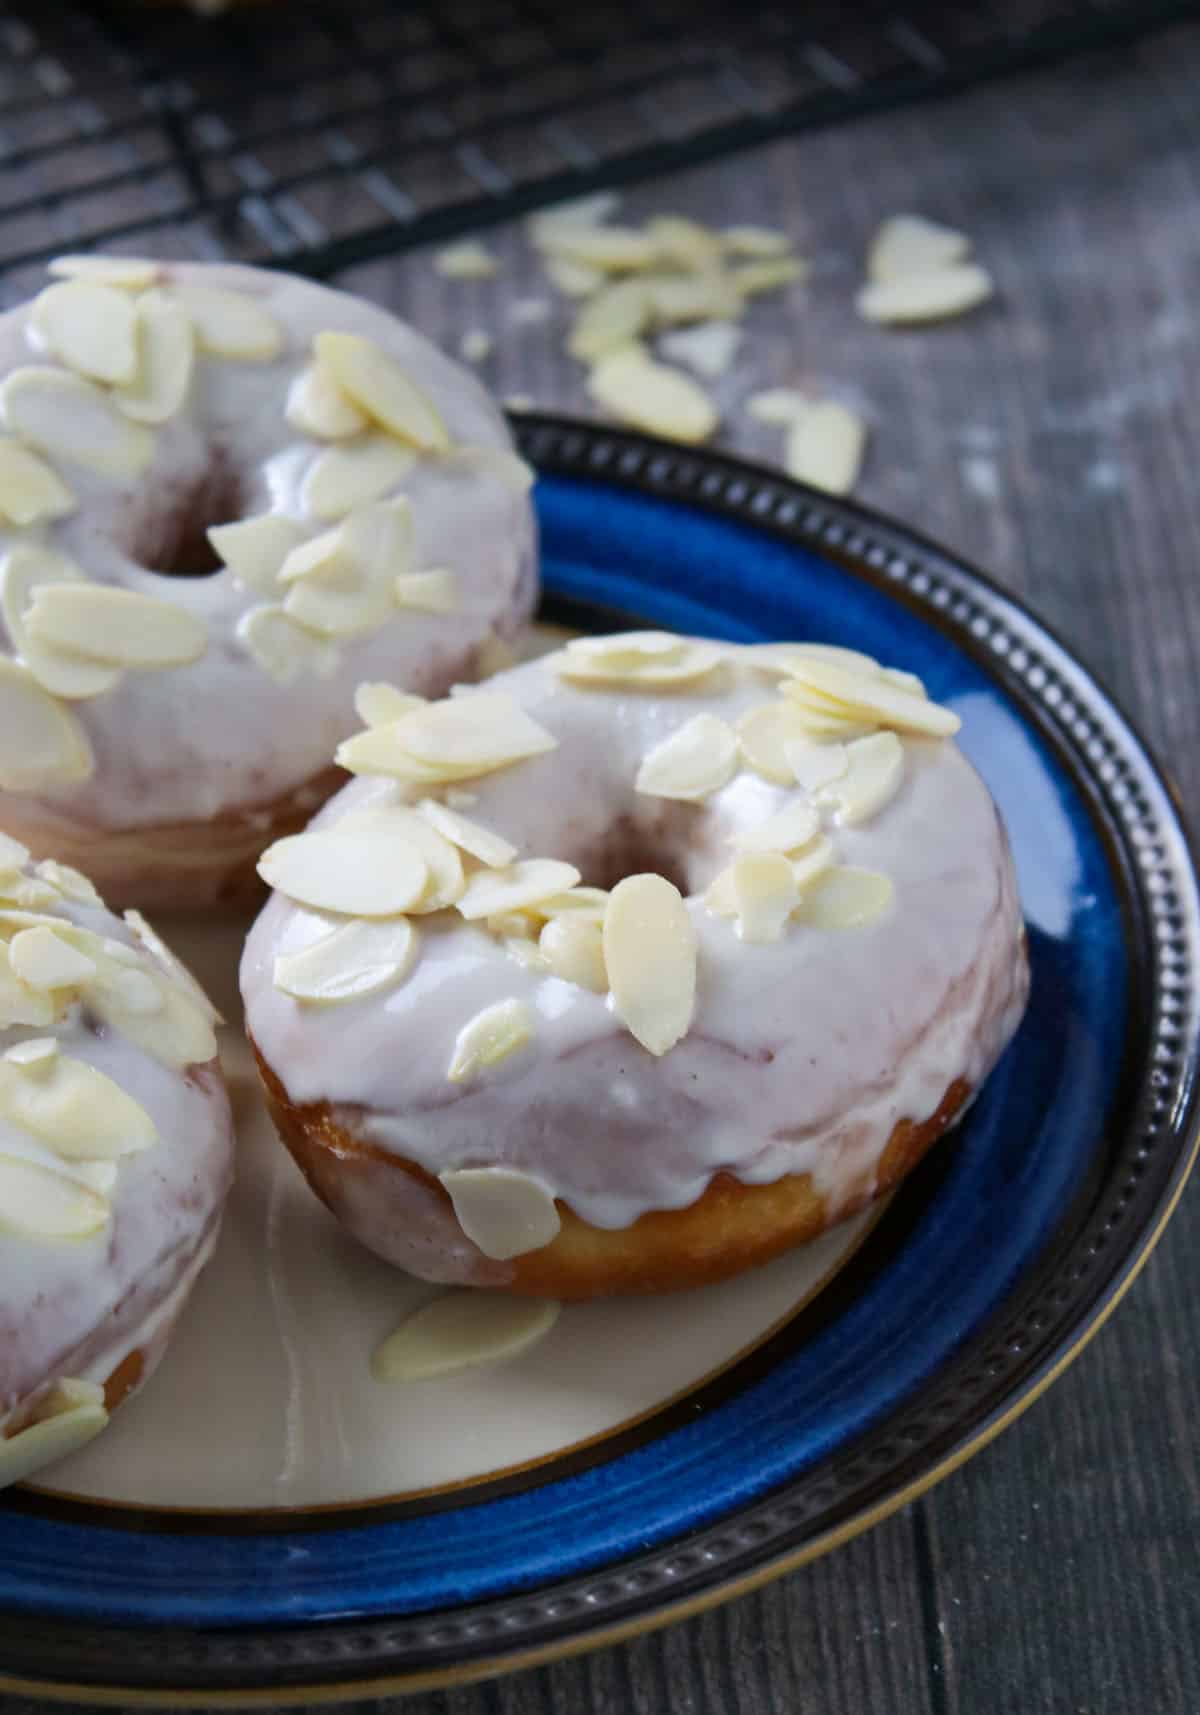 Three white chocolate yeast donuts on a plate.